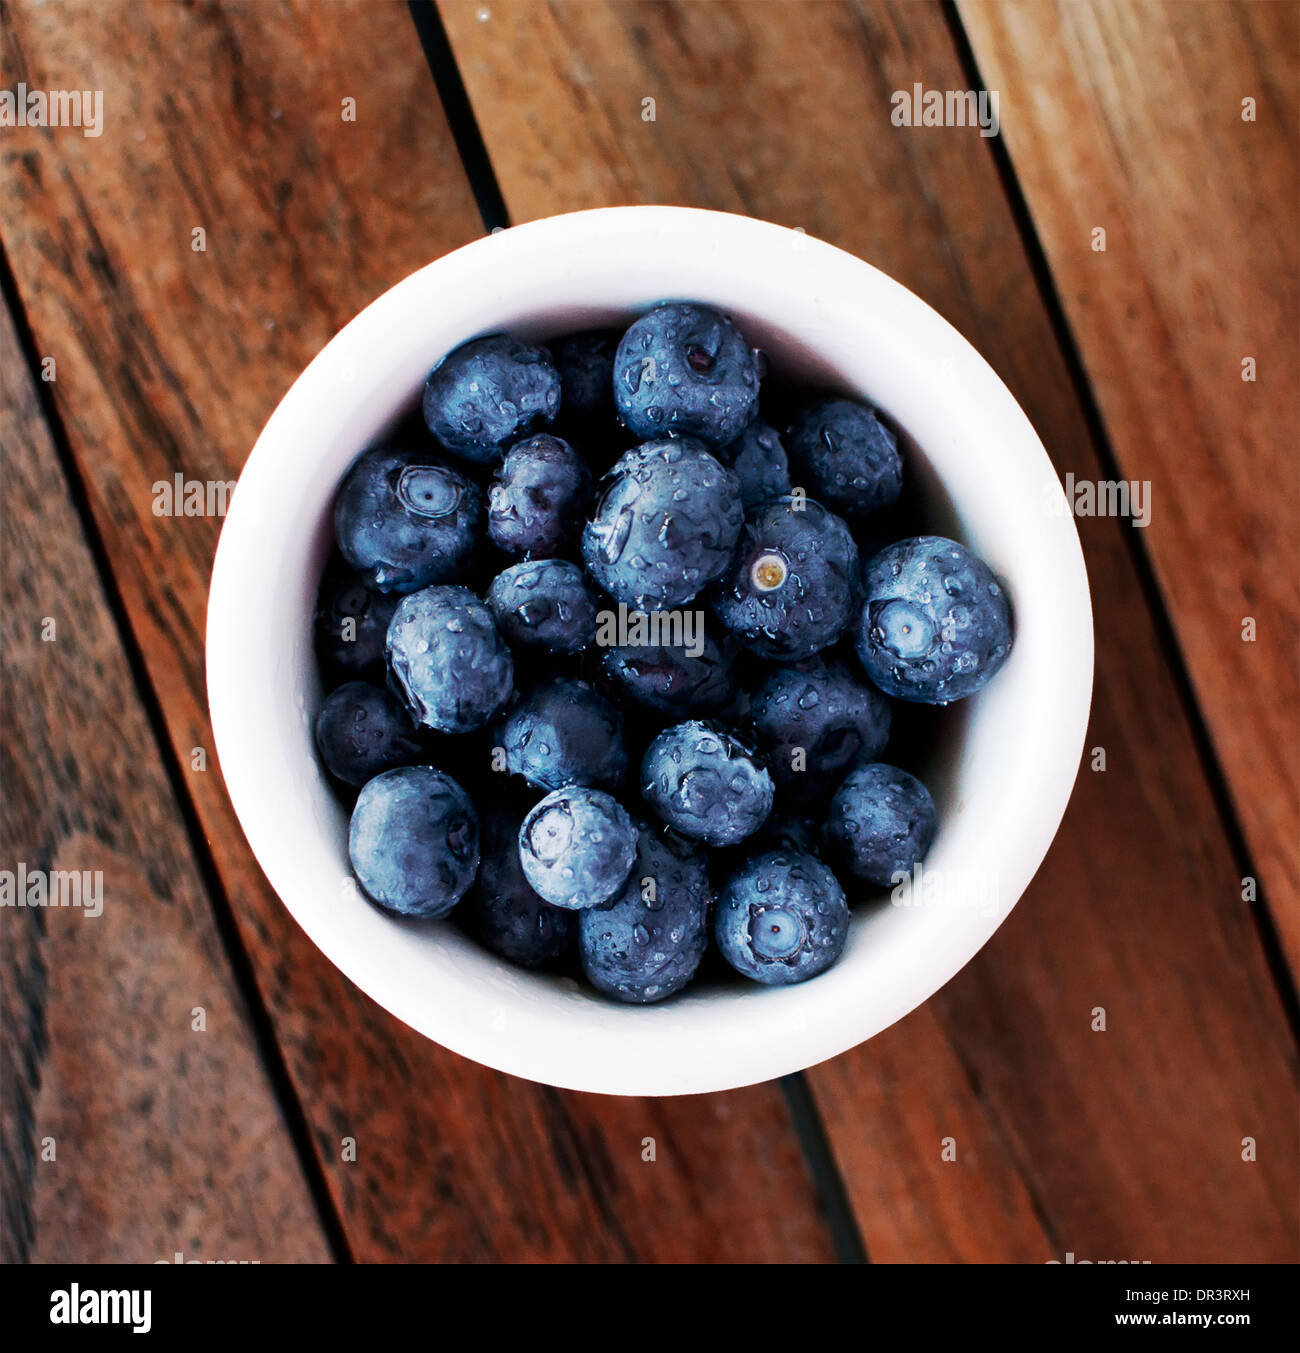 Blueberries in a bowl Stock Photo